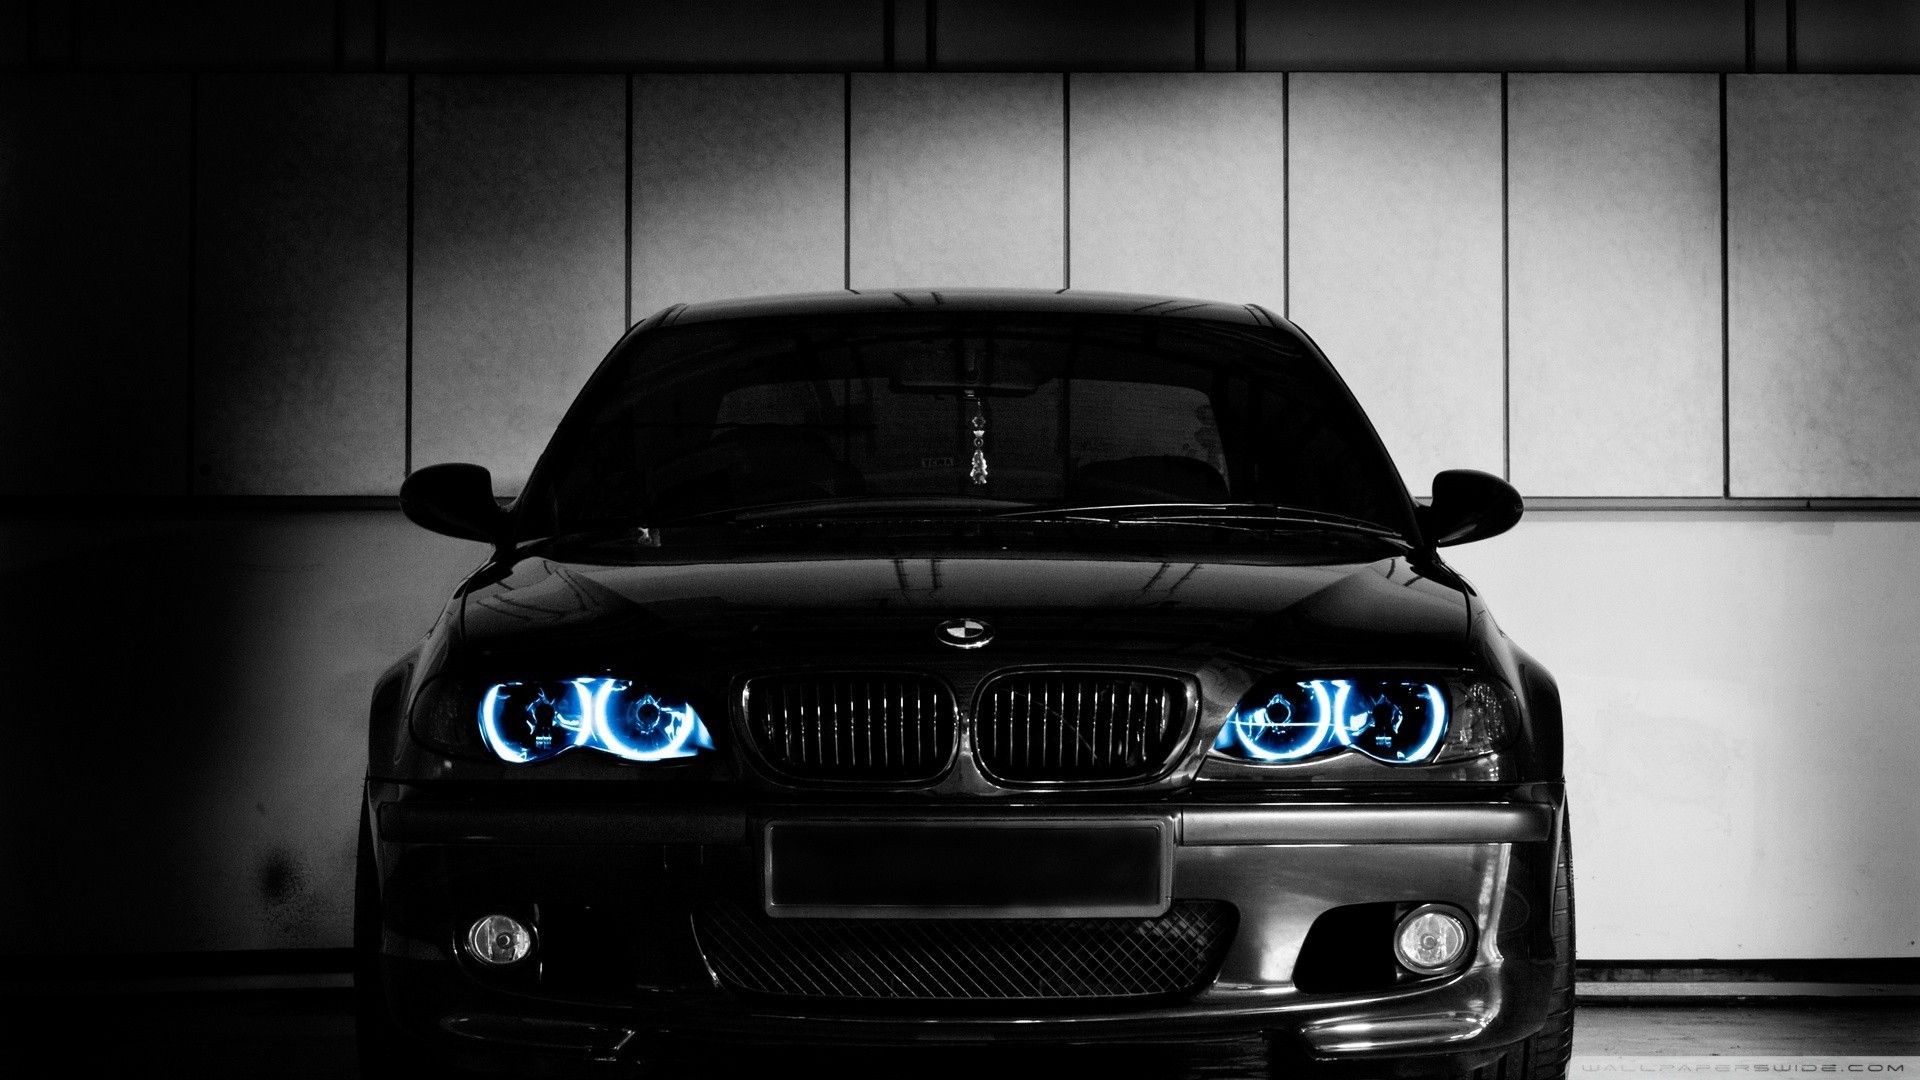 BMW Cars Wallpapers Free Download HD Motors Latest New Images